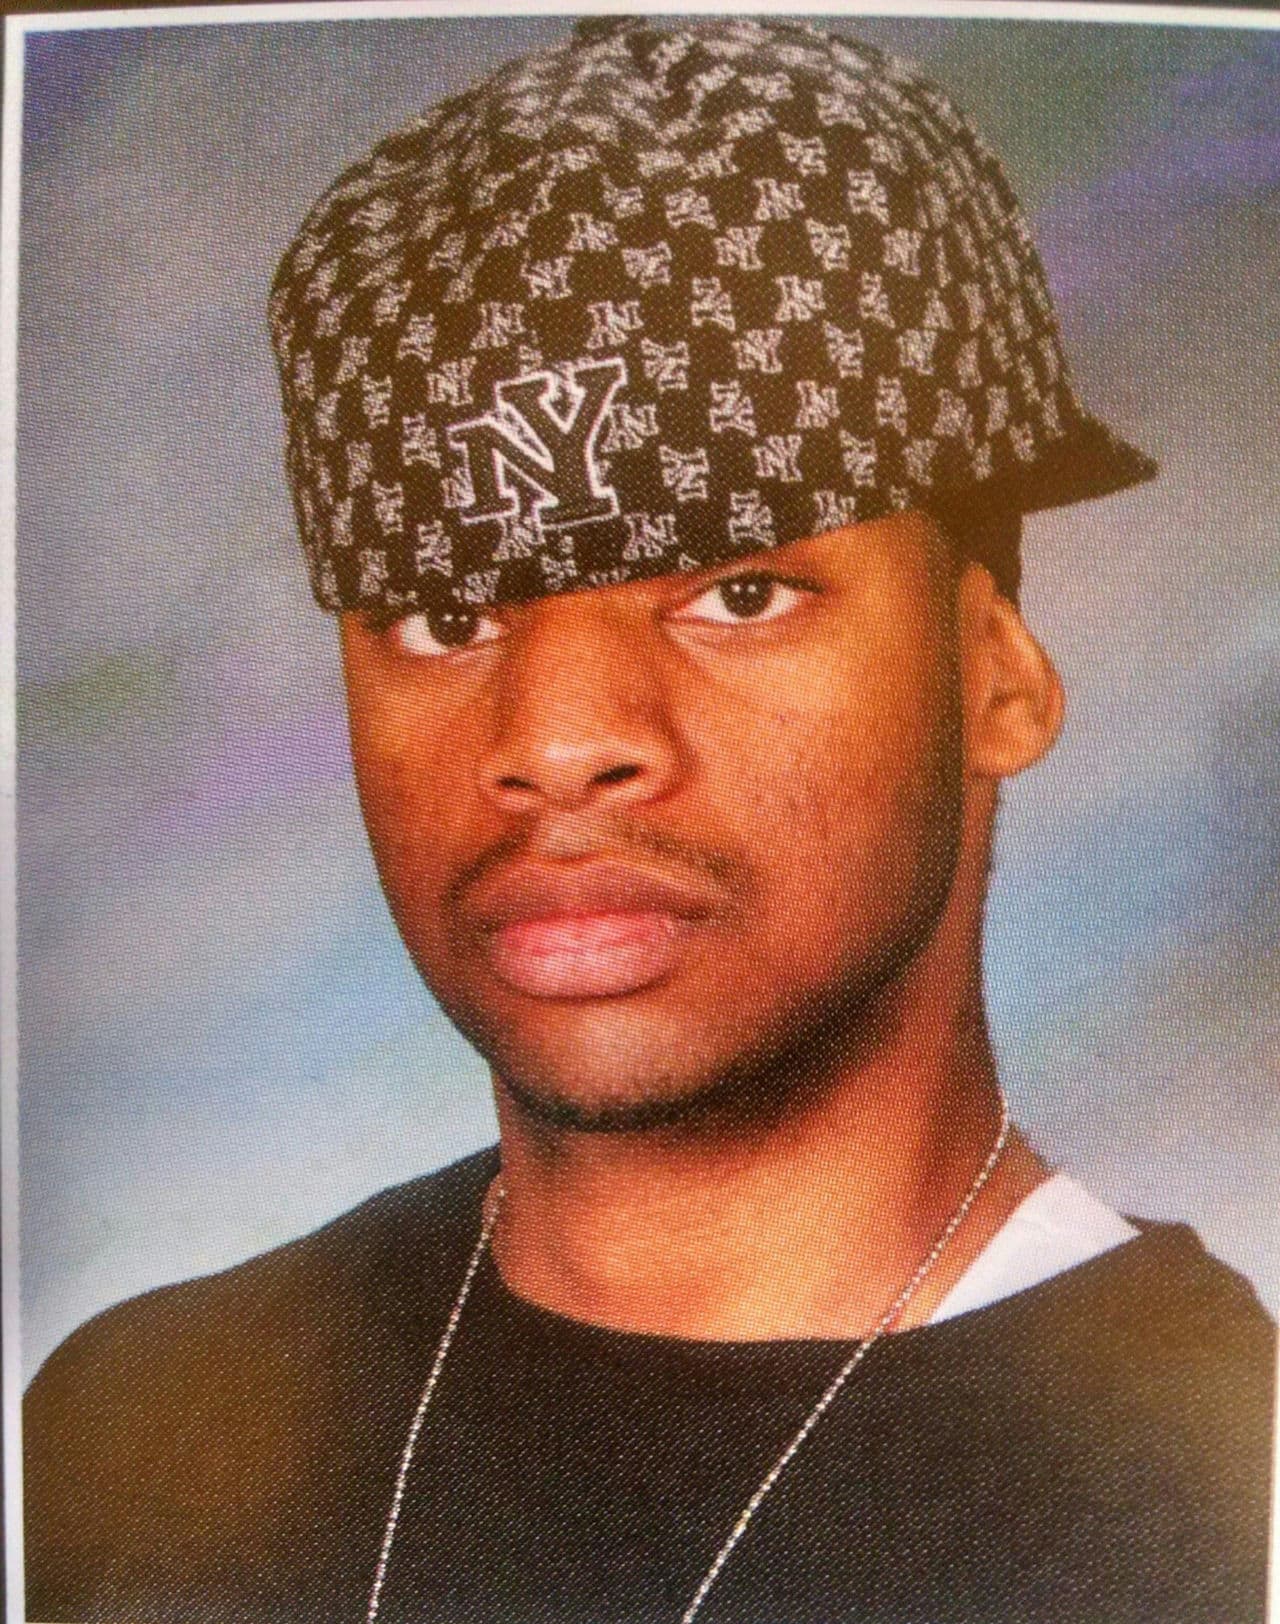 Usaamah Rahim in a 2007 Brookline High School yearbook photo. Rahim graduated from the school in 2007. (Courtesy Wicked Local Brookline)